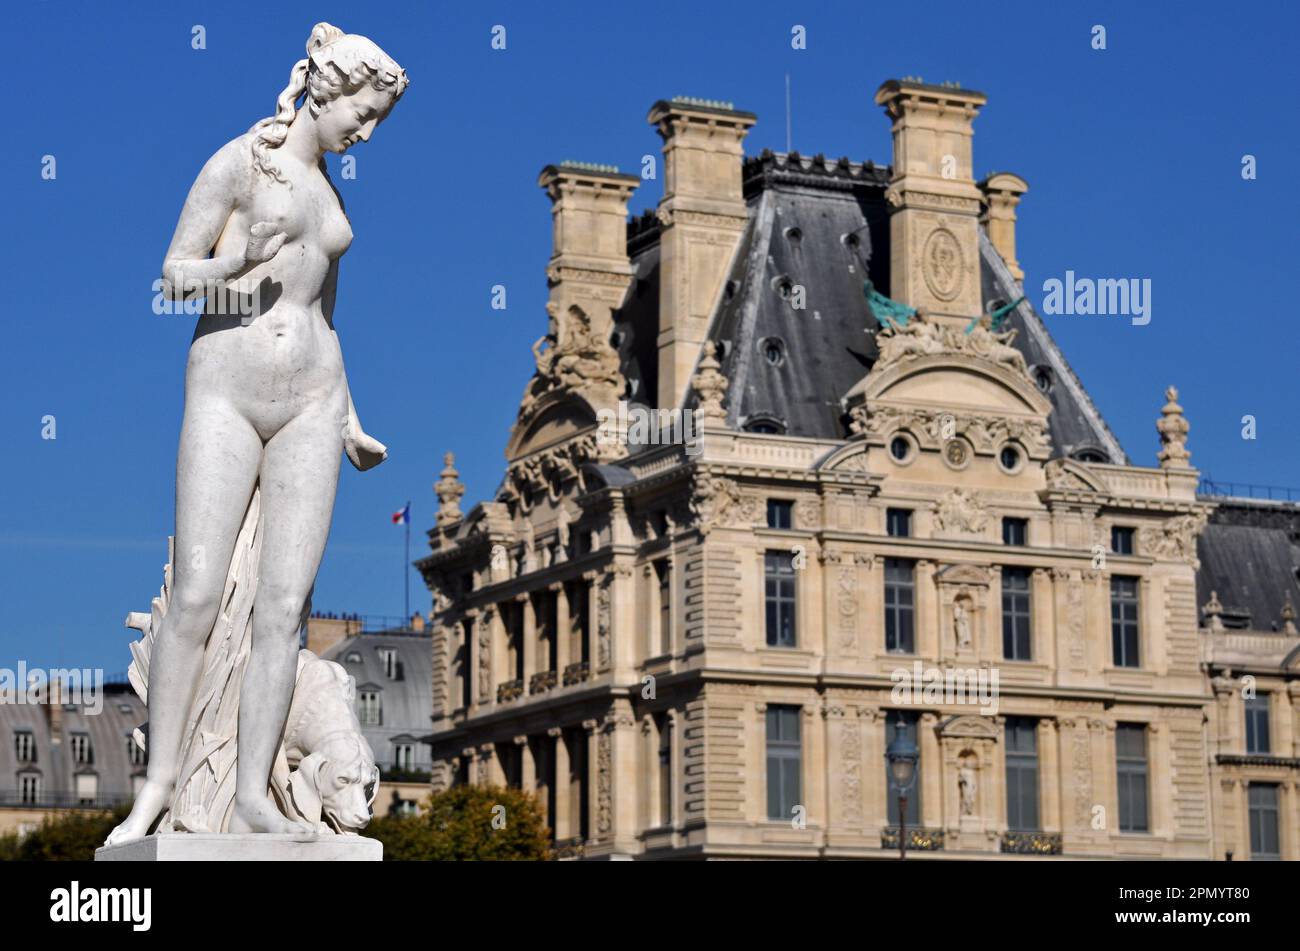 The Pavillon de Flore at the Louvre Palace in Paris is seen behind the sculpture Nymphe by Louis Auguste Lévêque, located in the Tuileries Garden. Stock Photo